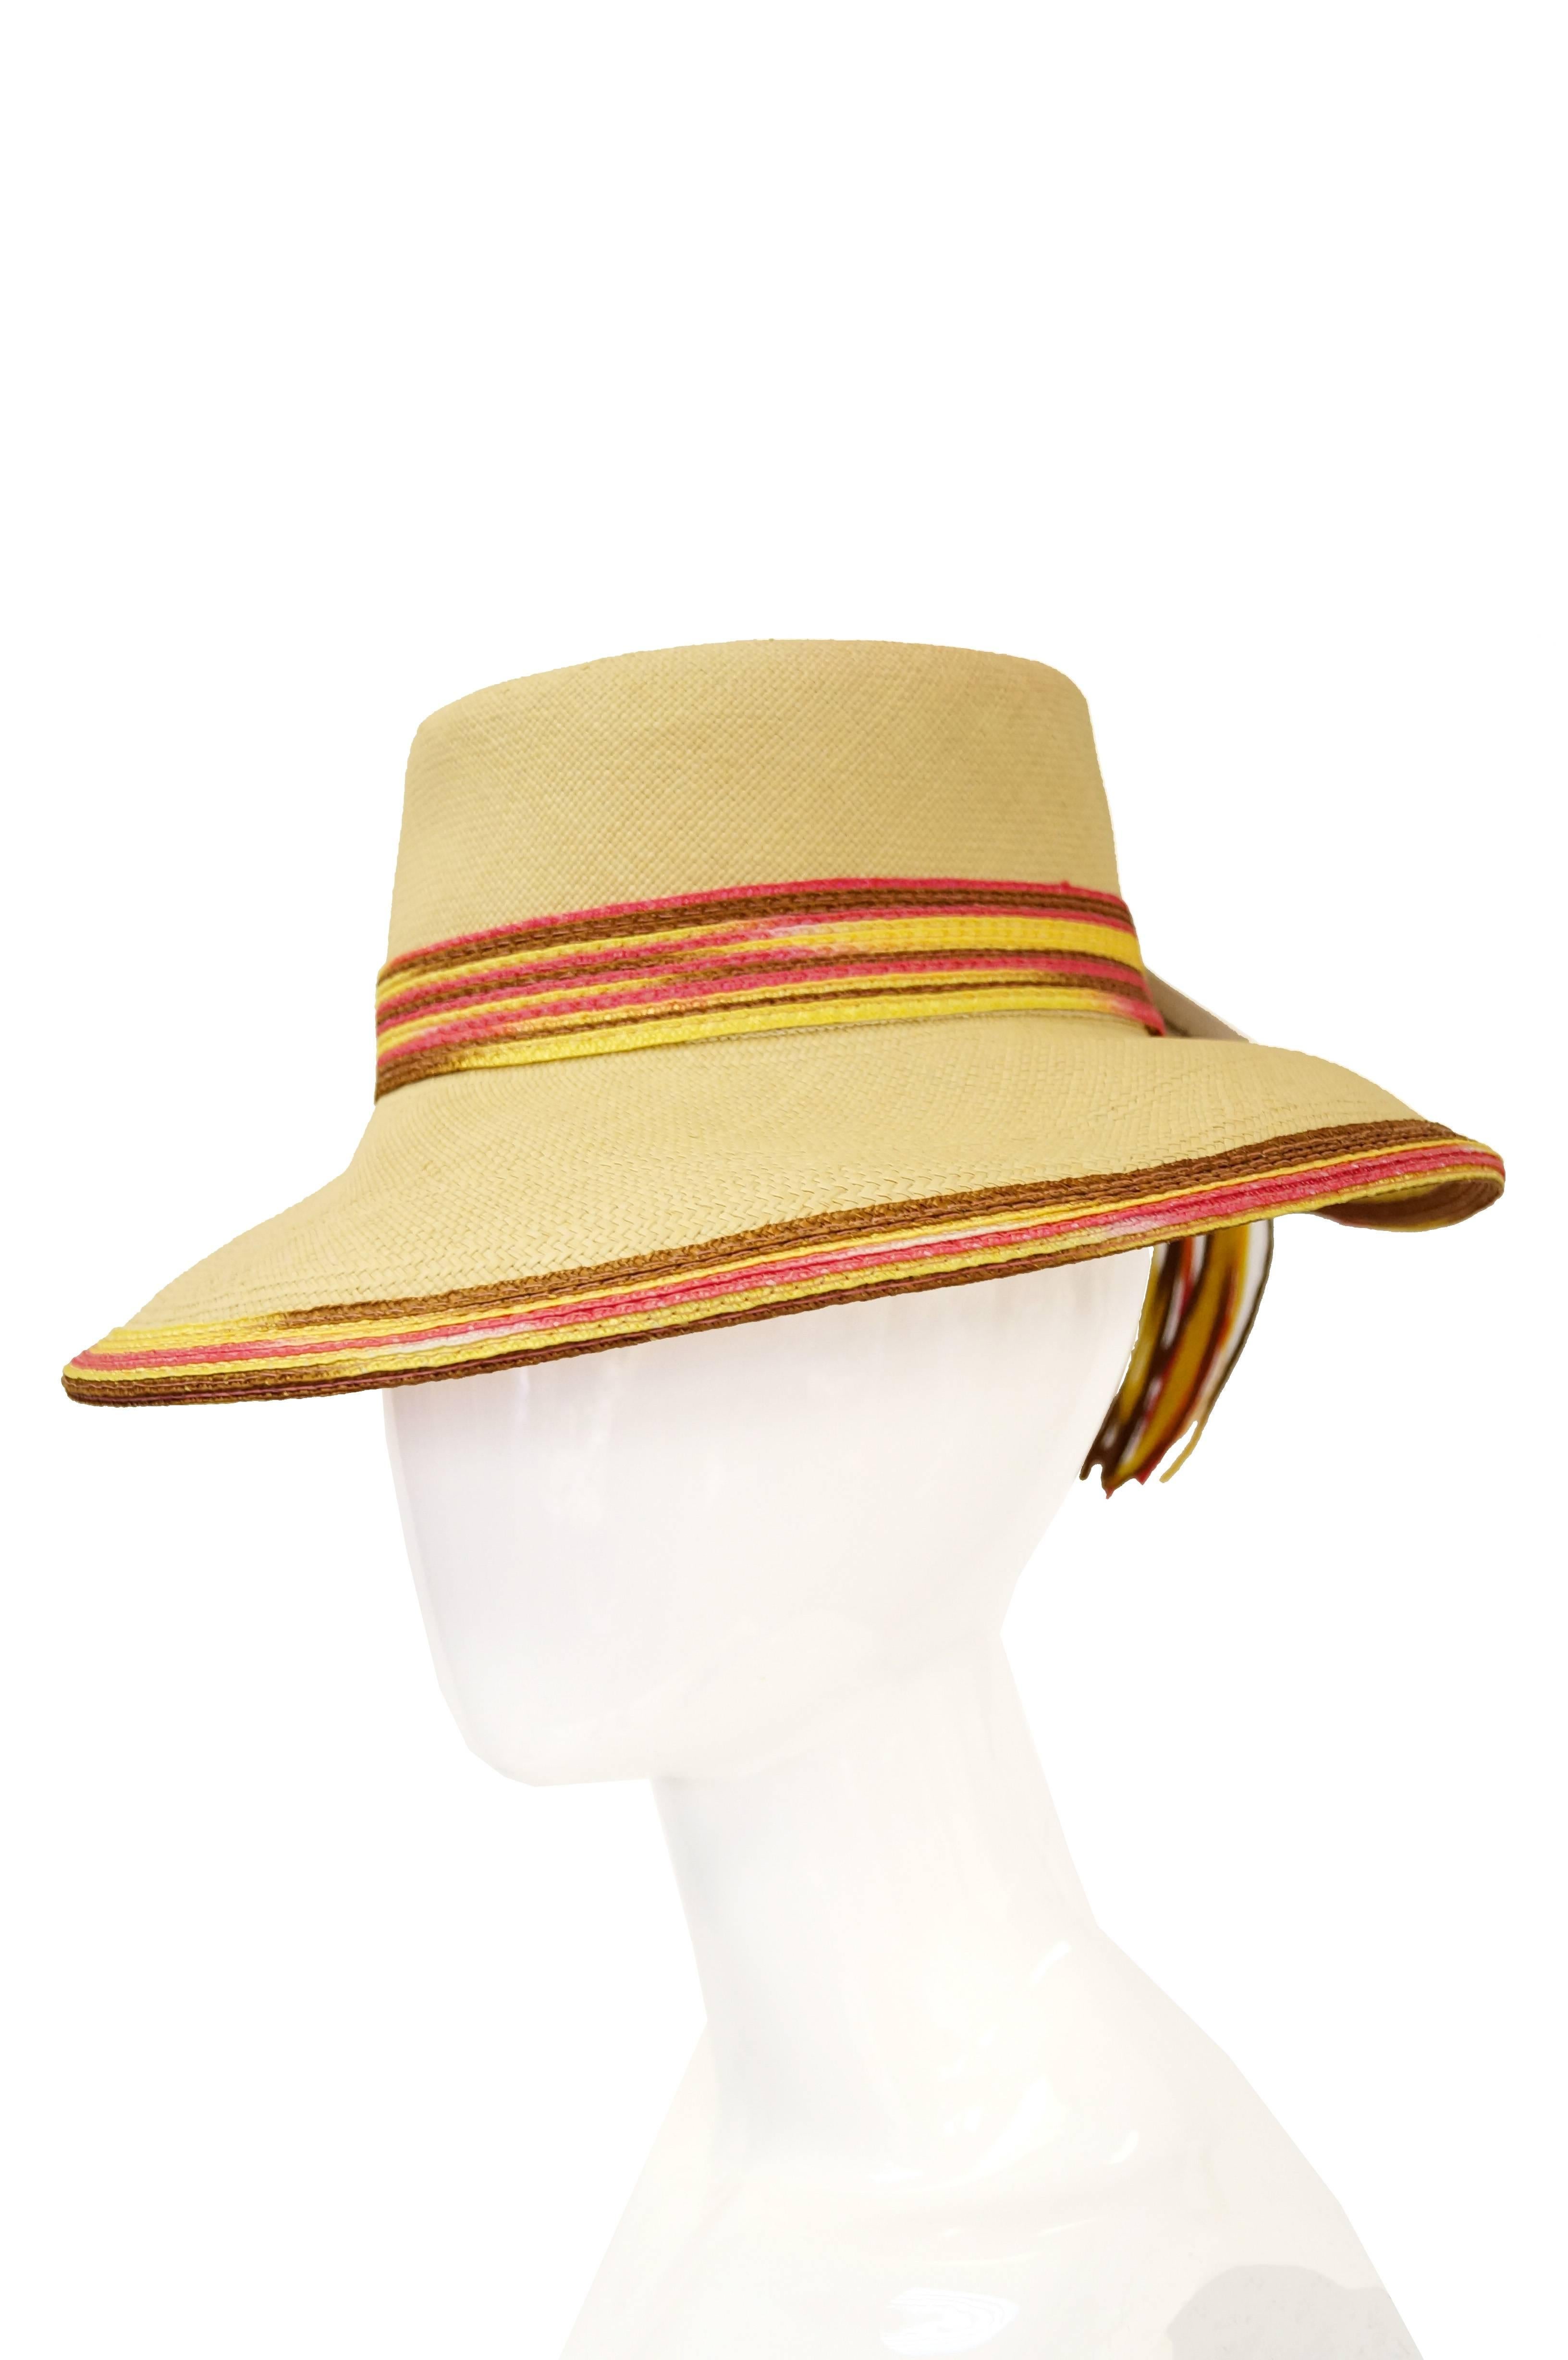 Playful and timeless sun hat by Yves Saint Laurent is perfect for your a weekend at the beach or just keeping your face out of the sun. 

The woven hat features a sandy yellow upper with colorful pink and brown edges and trim. The back of the hat is